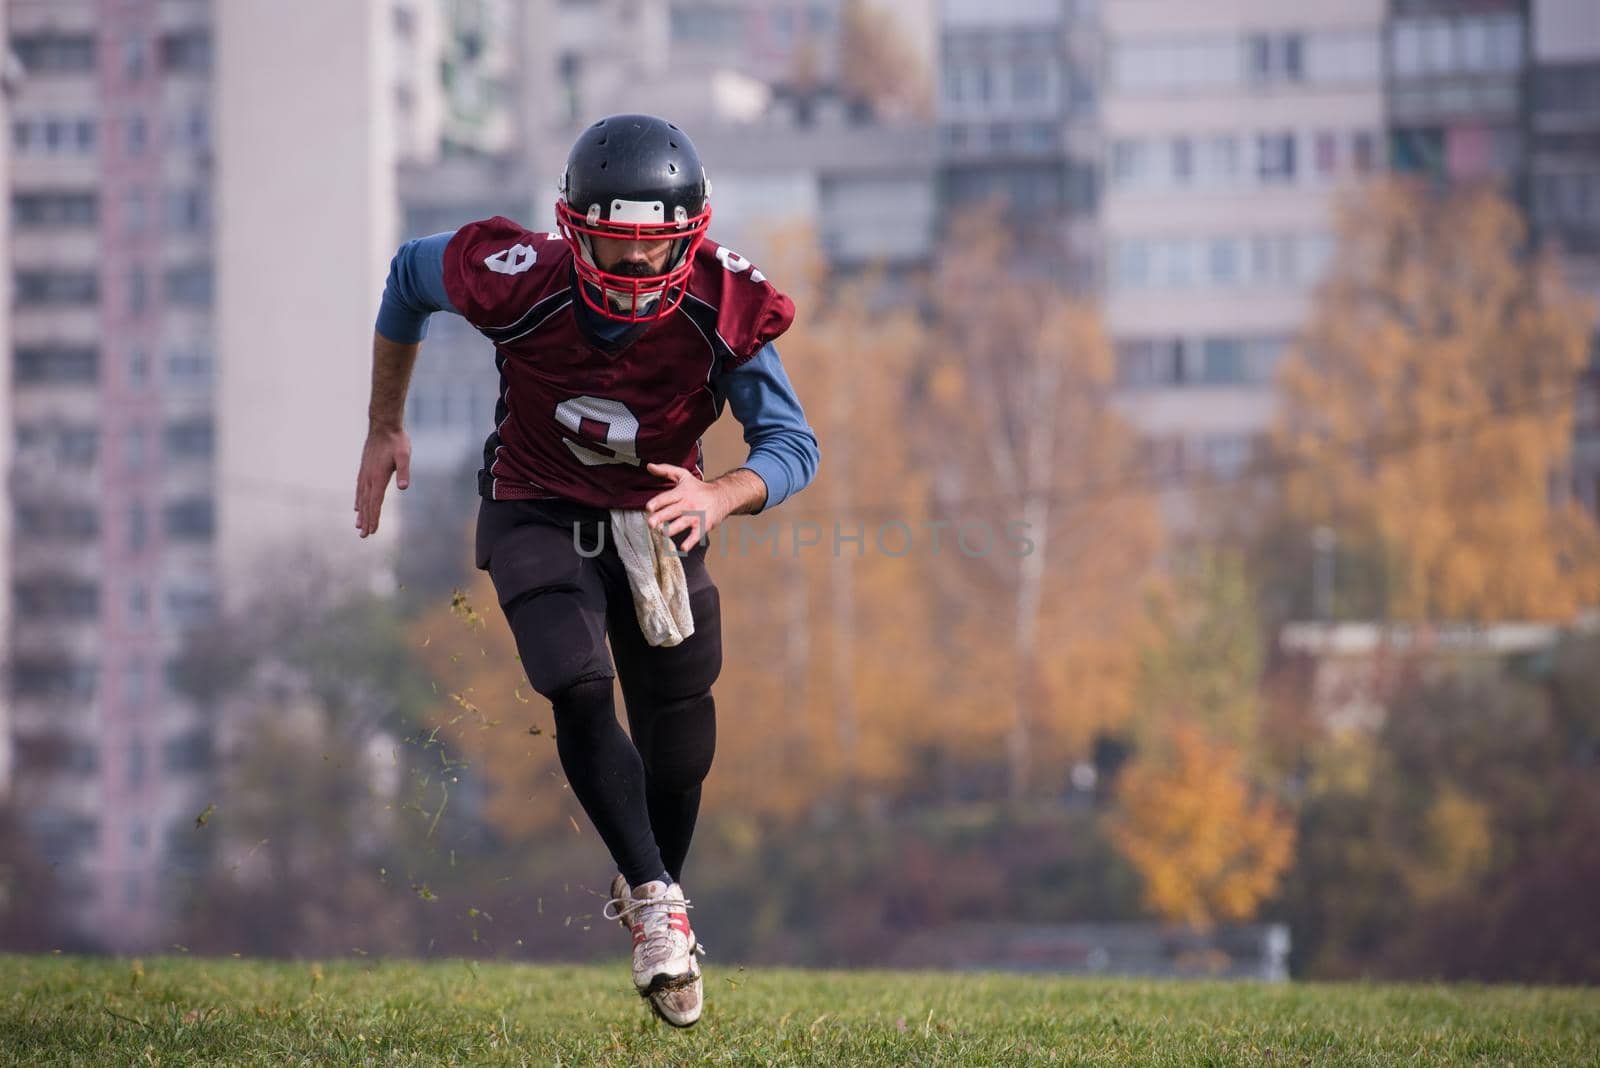 american football player in action by dotshock